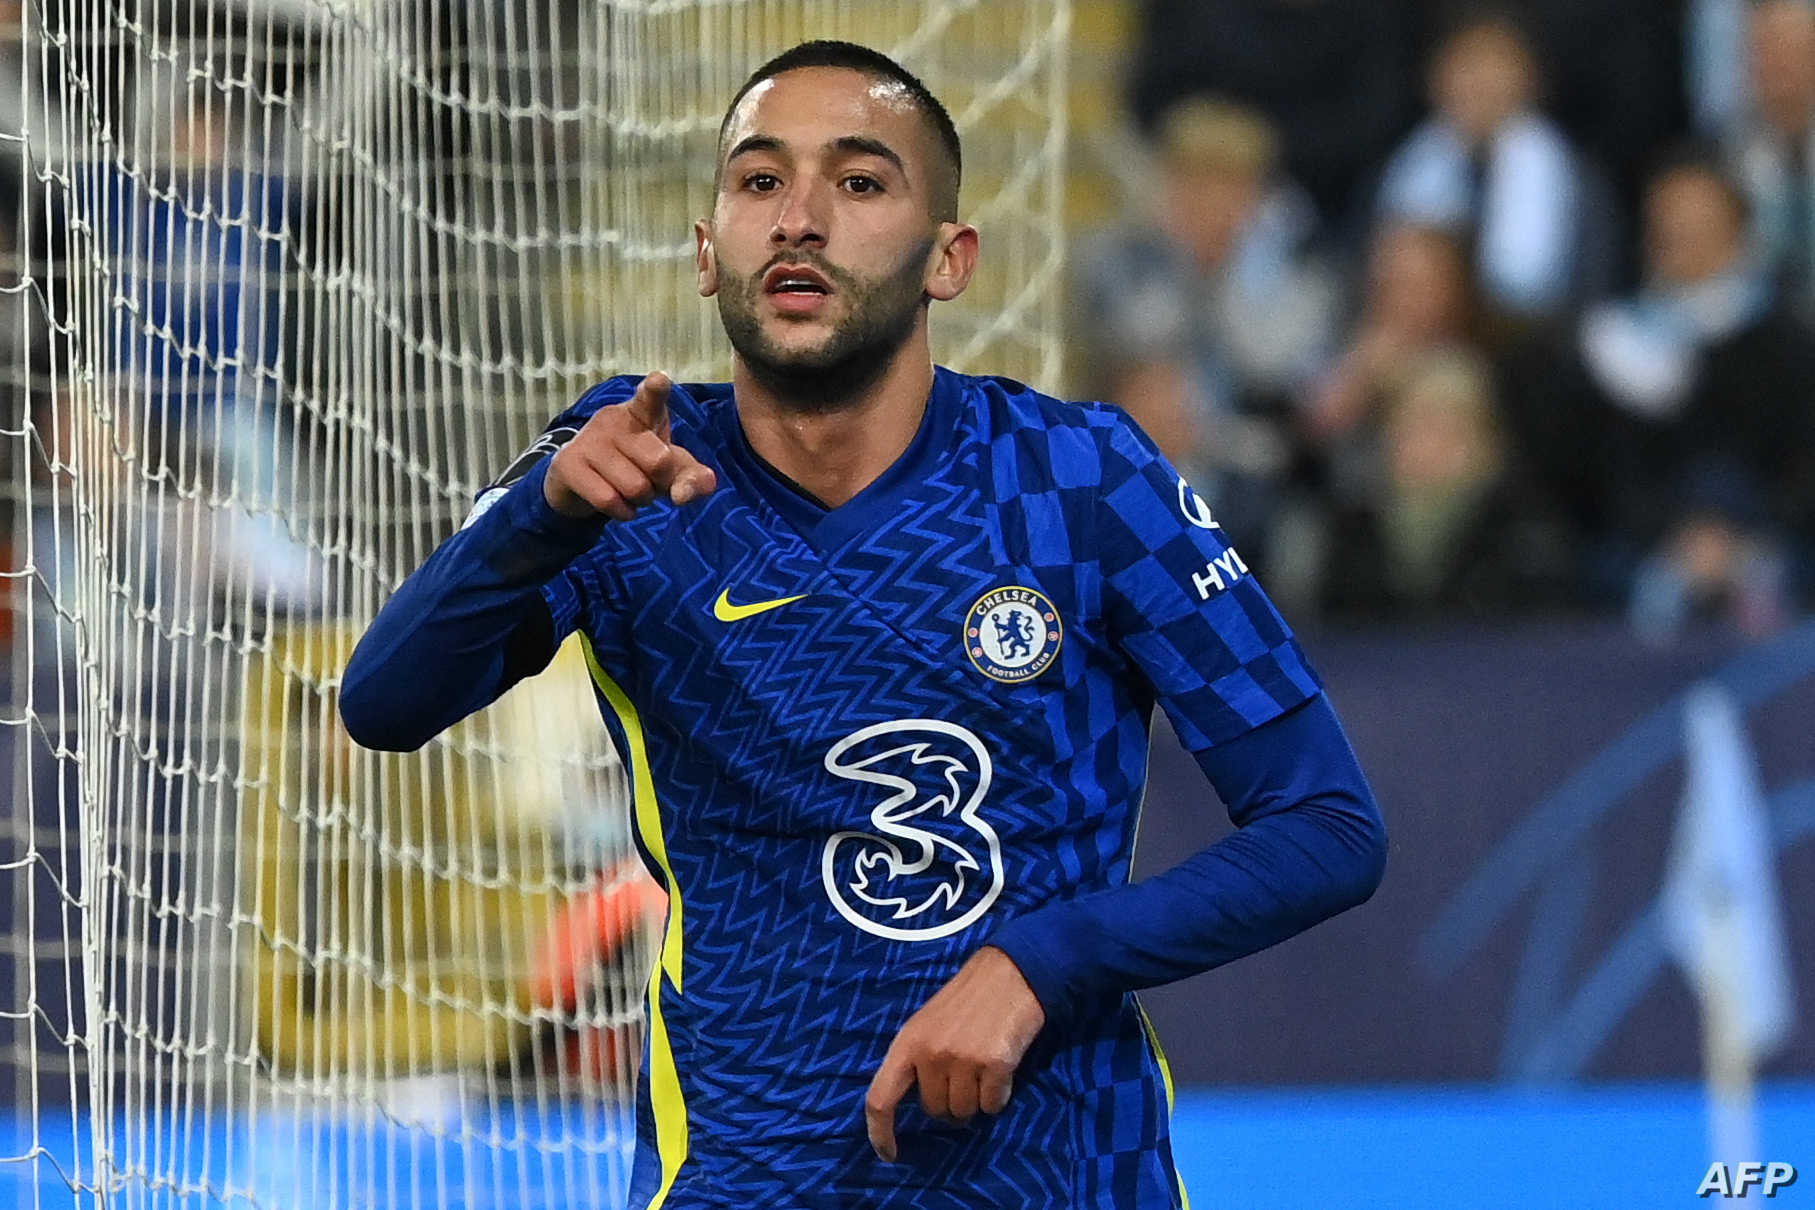 Chelsea's Moroccan midfielder Hakim Ziyech celebrates scoring the opening goal during the UEFA Champions League group H football match Malmo FF v Chelsea FC in Malmo, Sweden on November 2, 2021. (Photo by Jonathan NACKSTRAND / AFP)